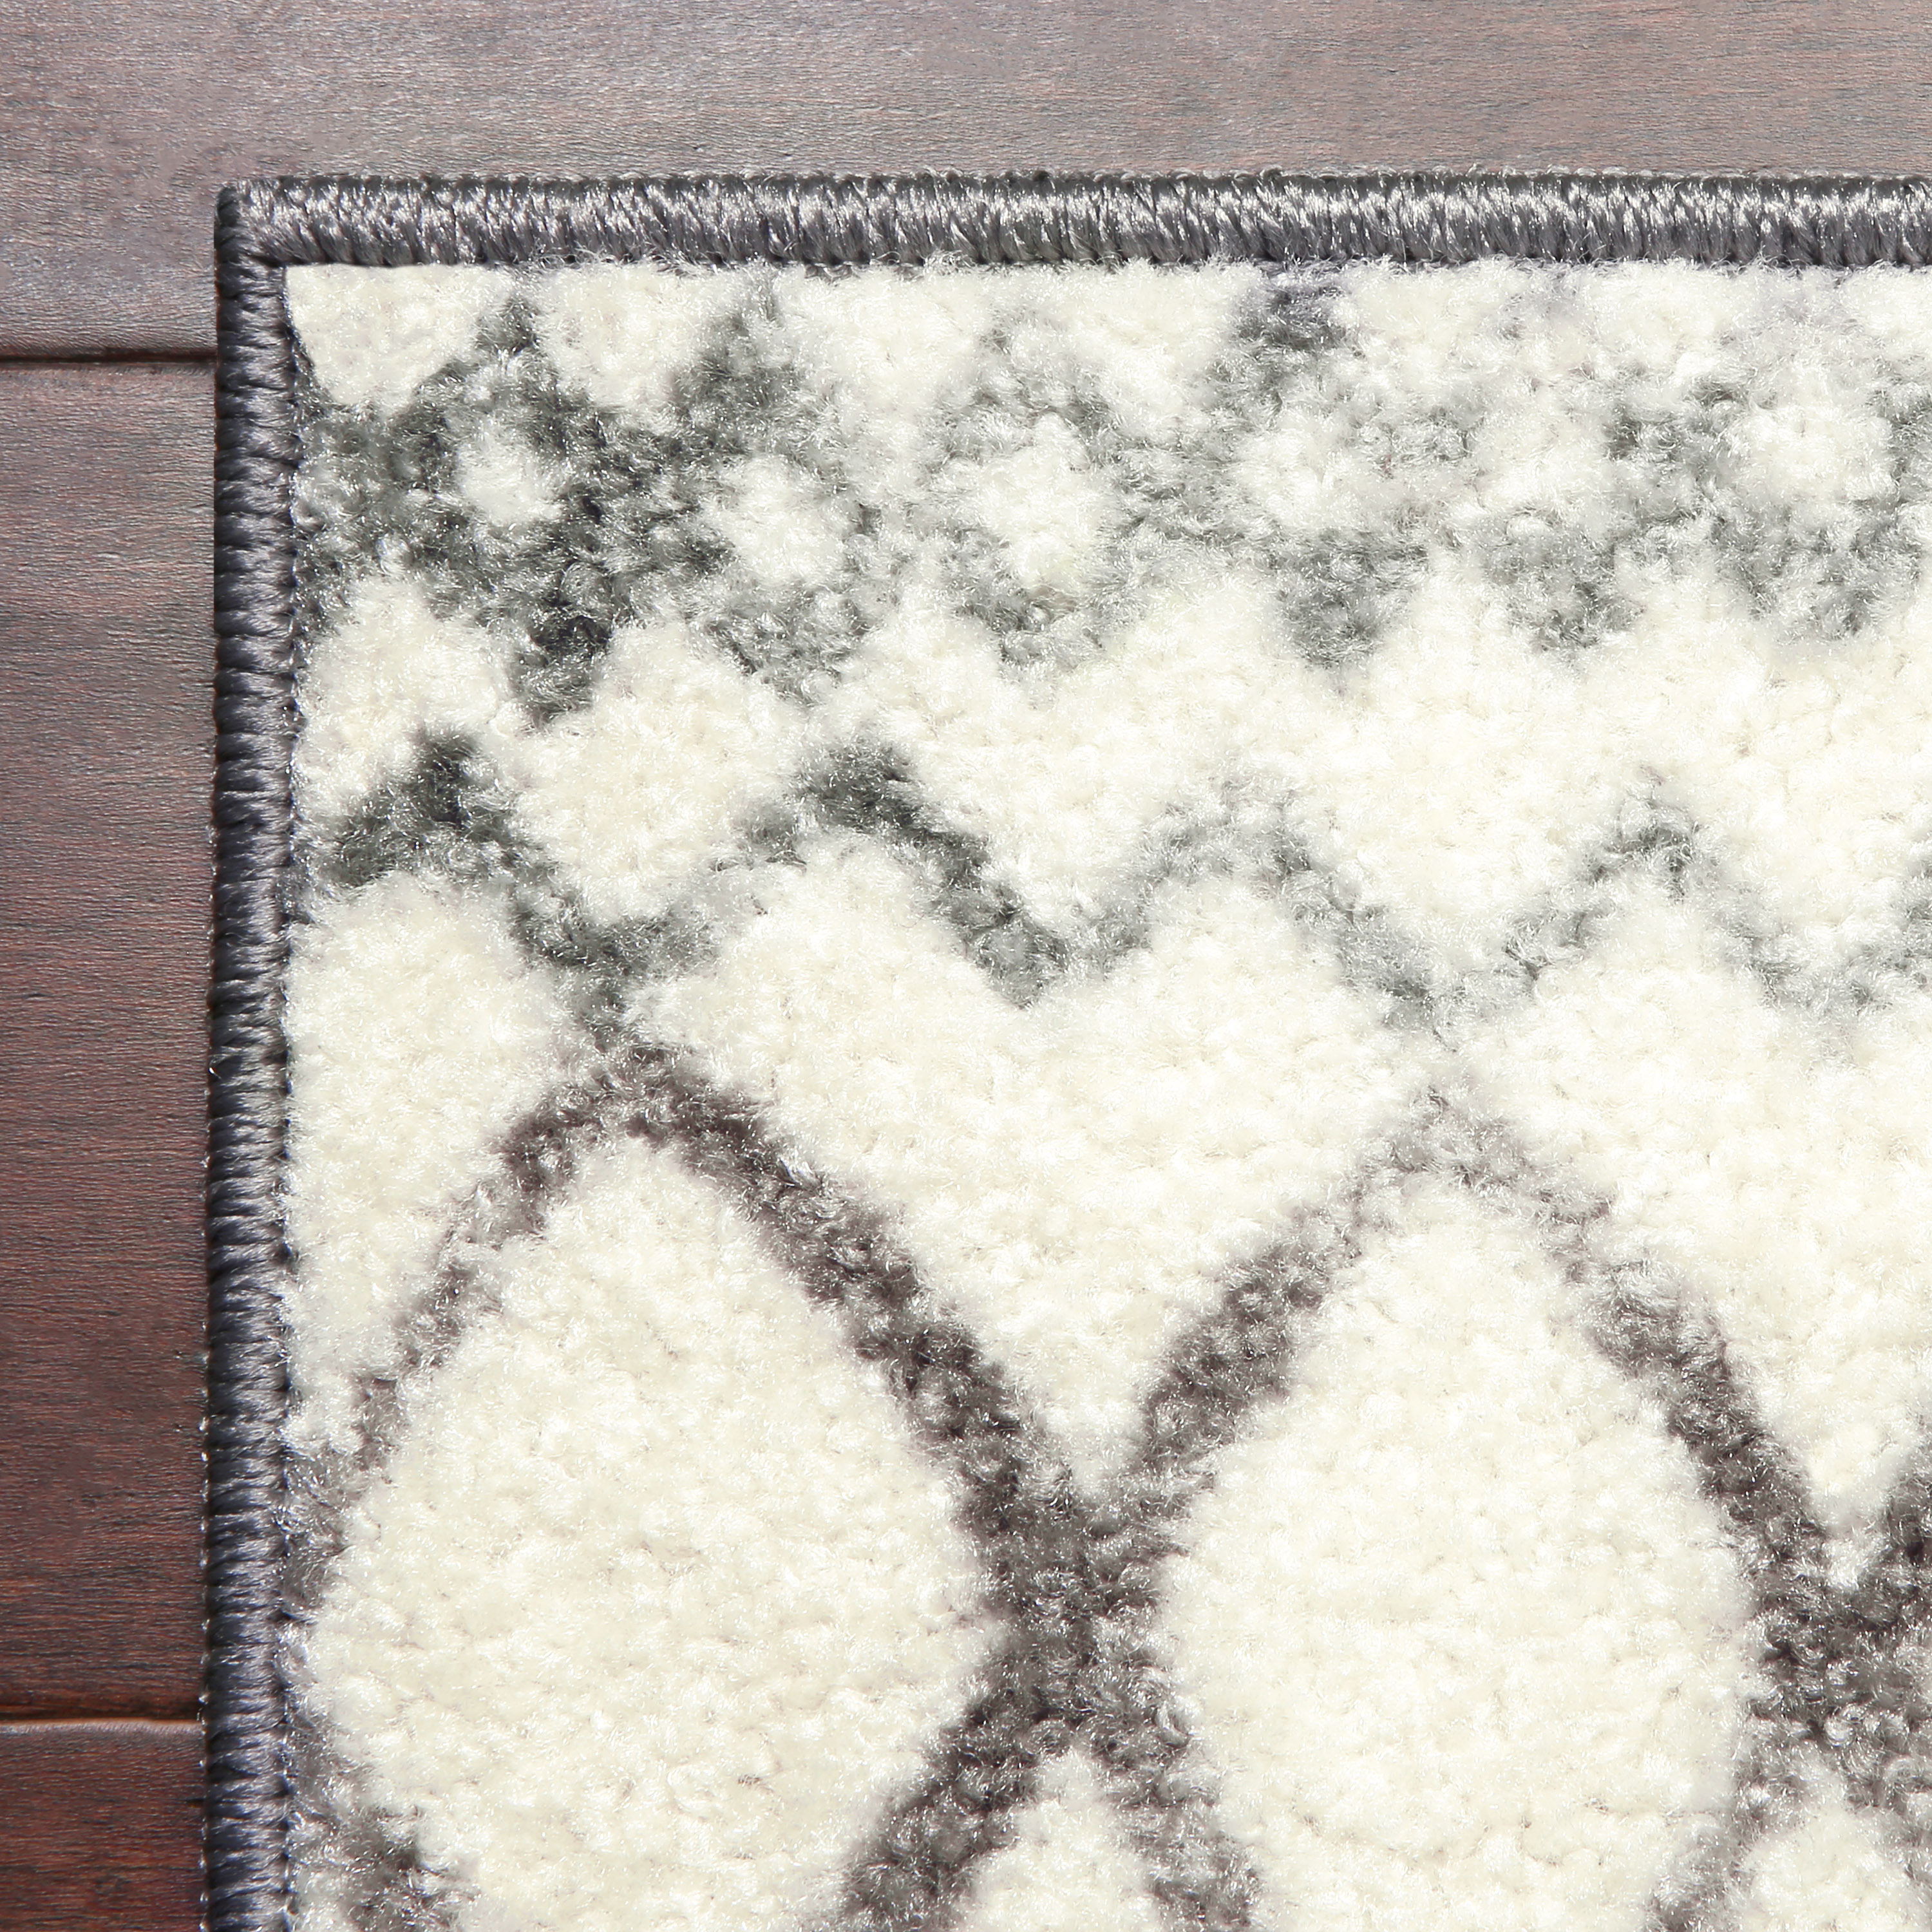 Maples Rugs Distressed Bohemian Diamond Indoor Area Rug, Ivory|Gray, 5' x 7' - image 4 of 7